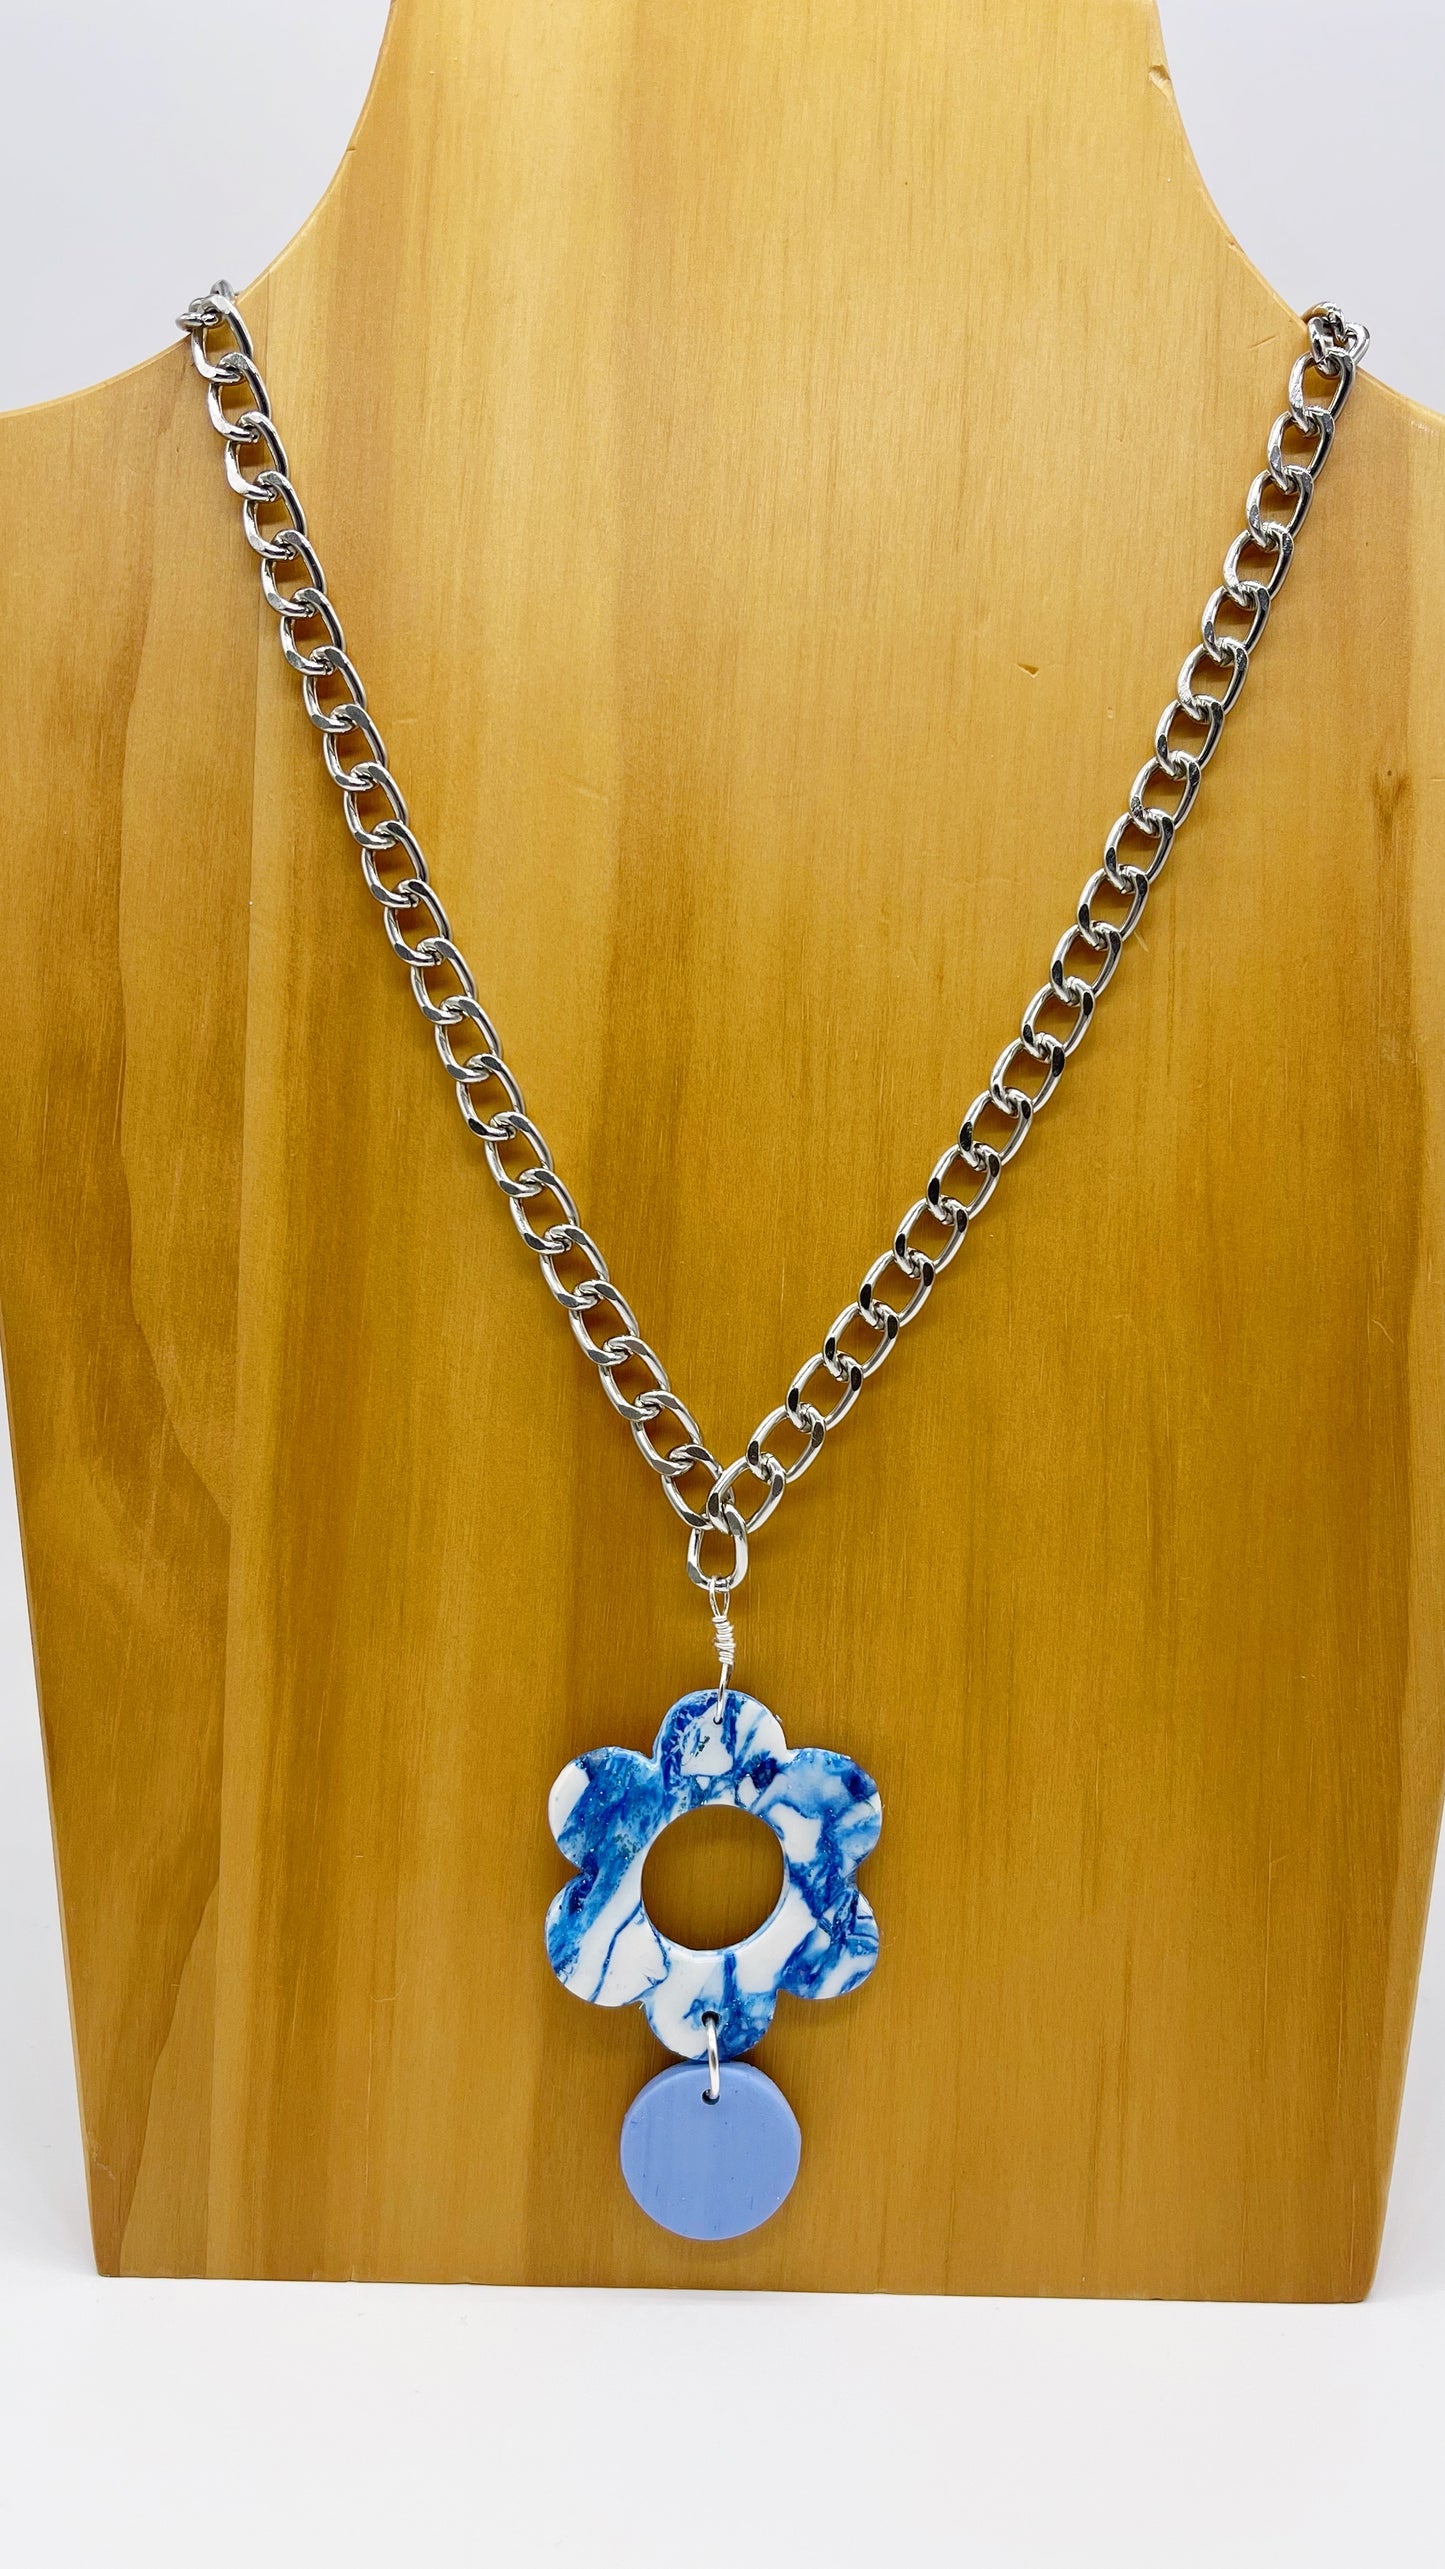 Blue Marble Necklace $29